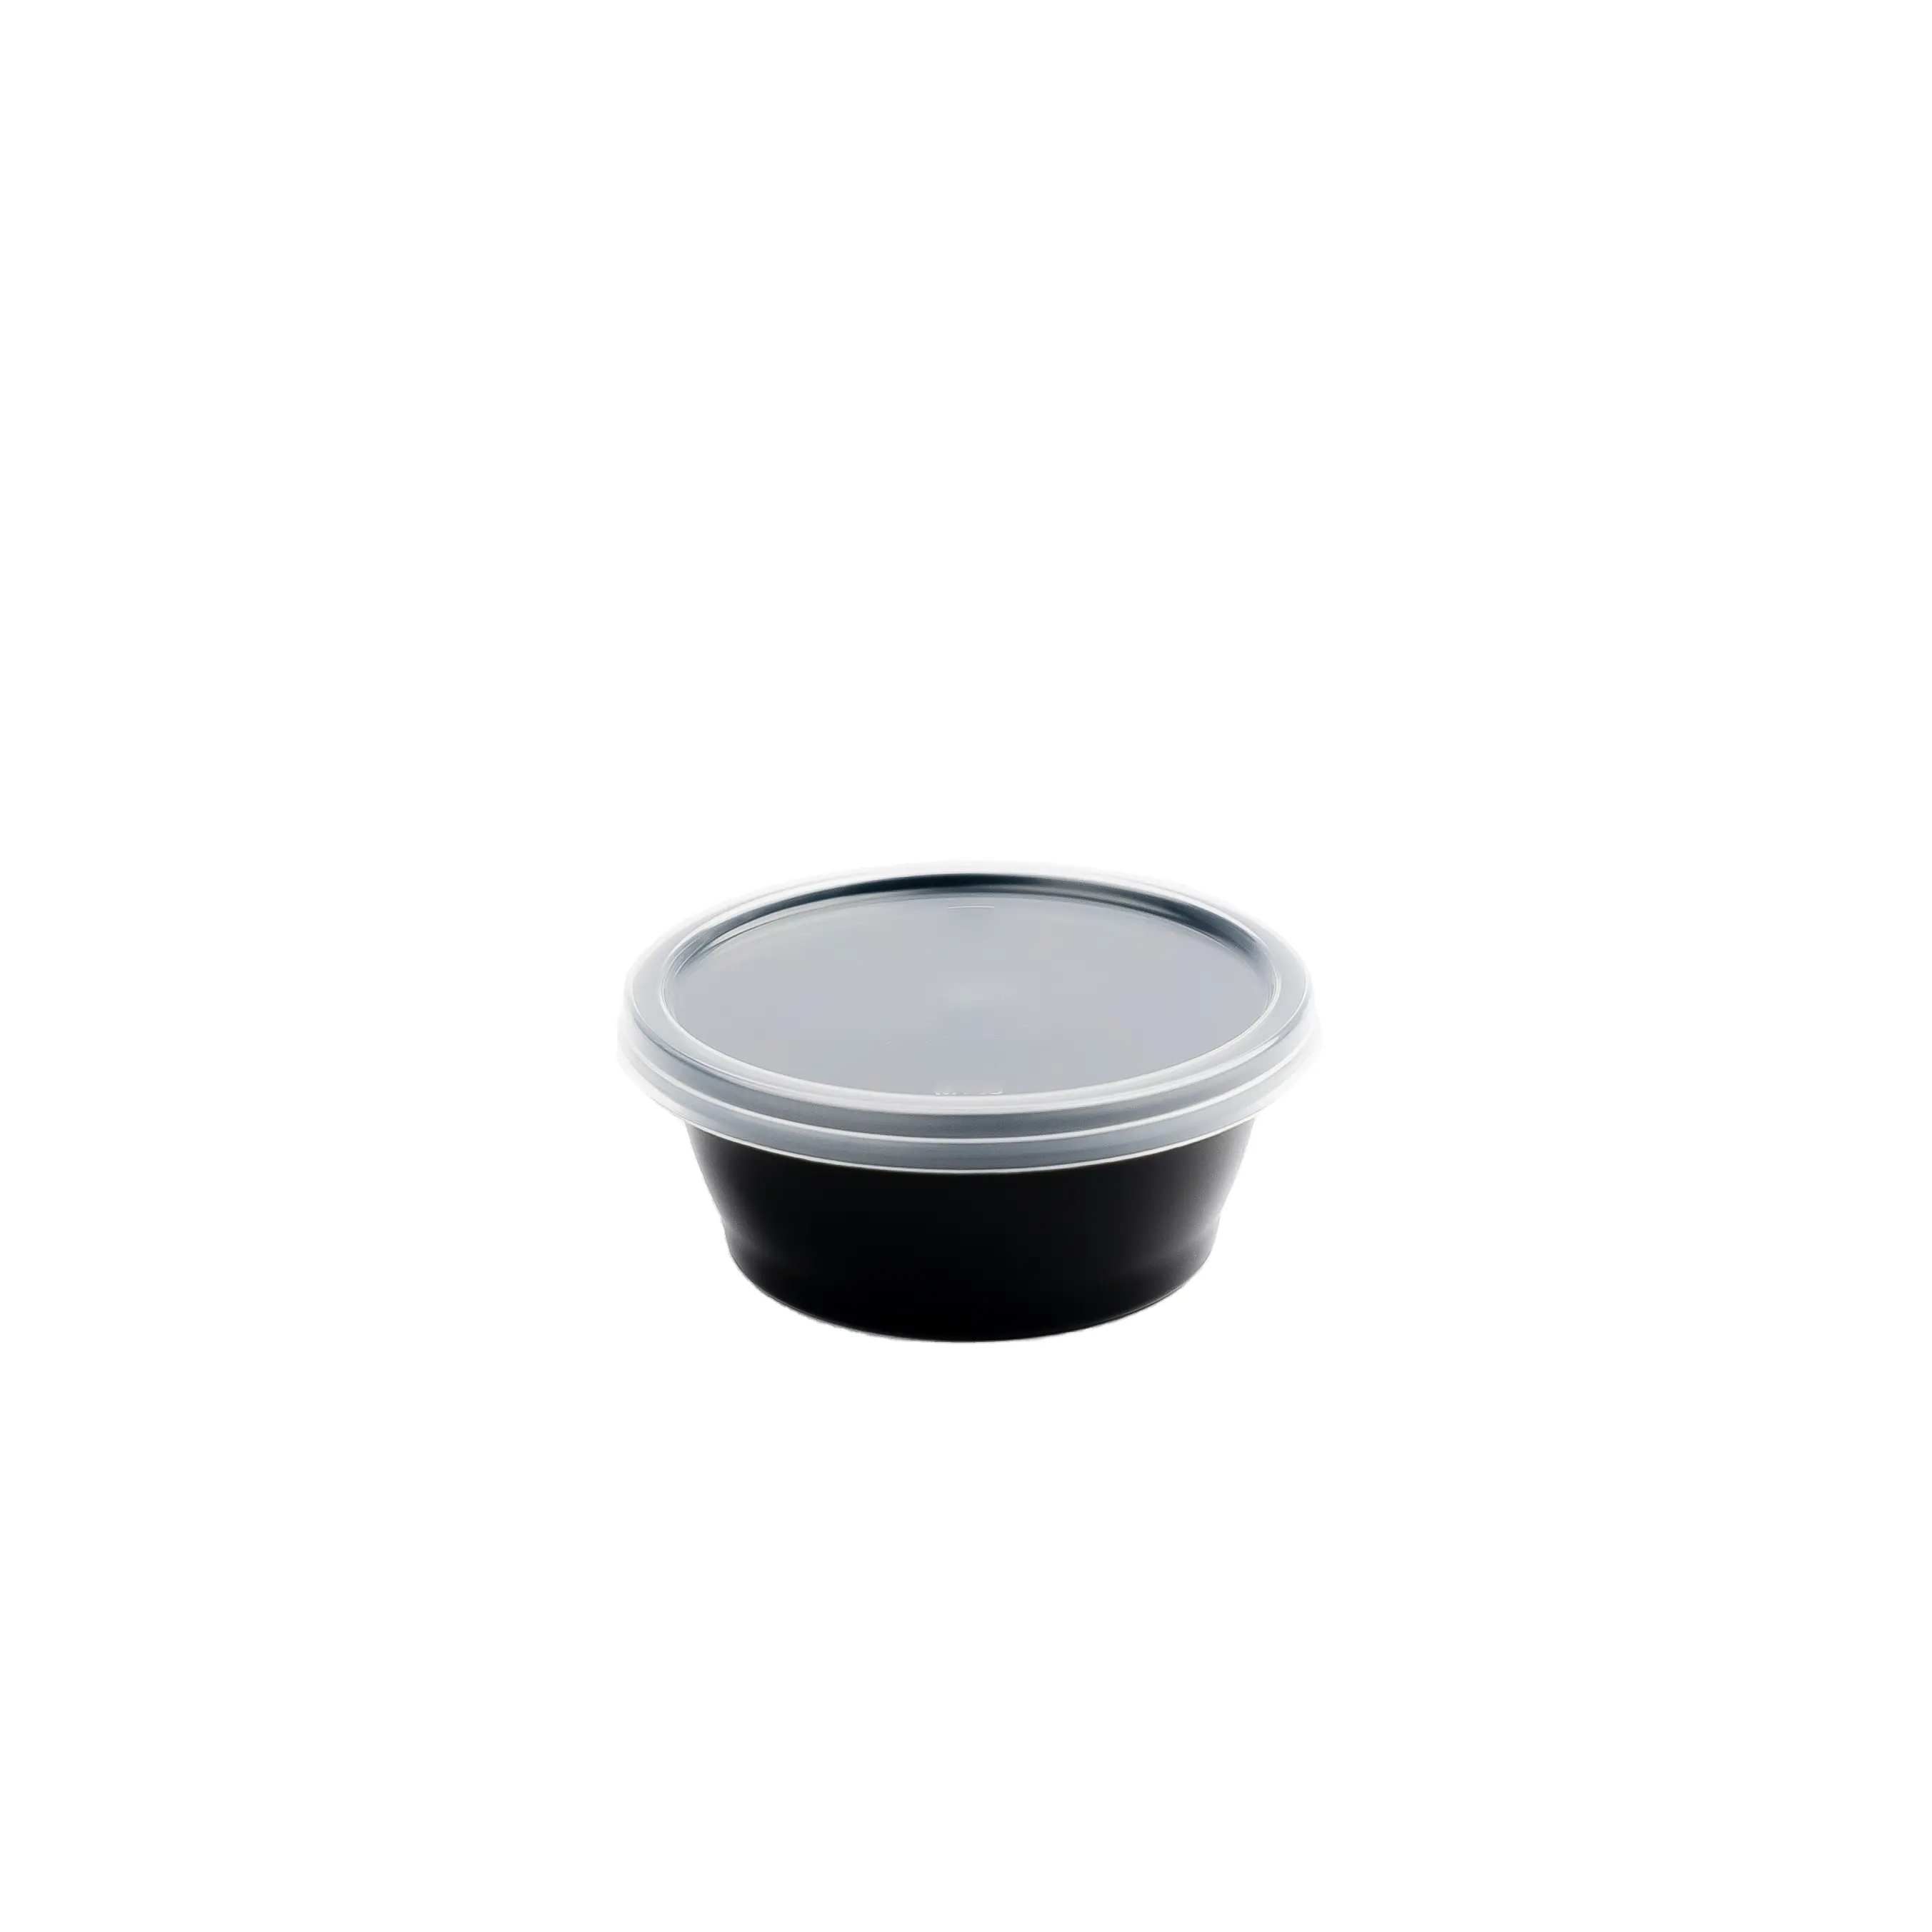 Exciting deals on Durable Leak Resistant Round Takeaway Container available in high quantity at wholesale price